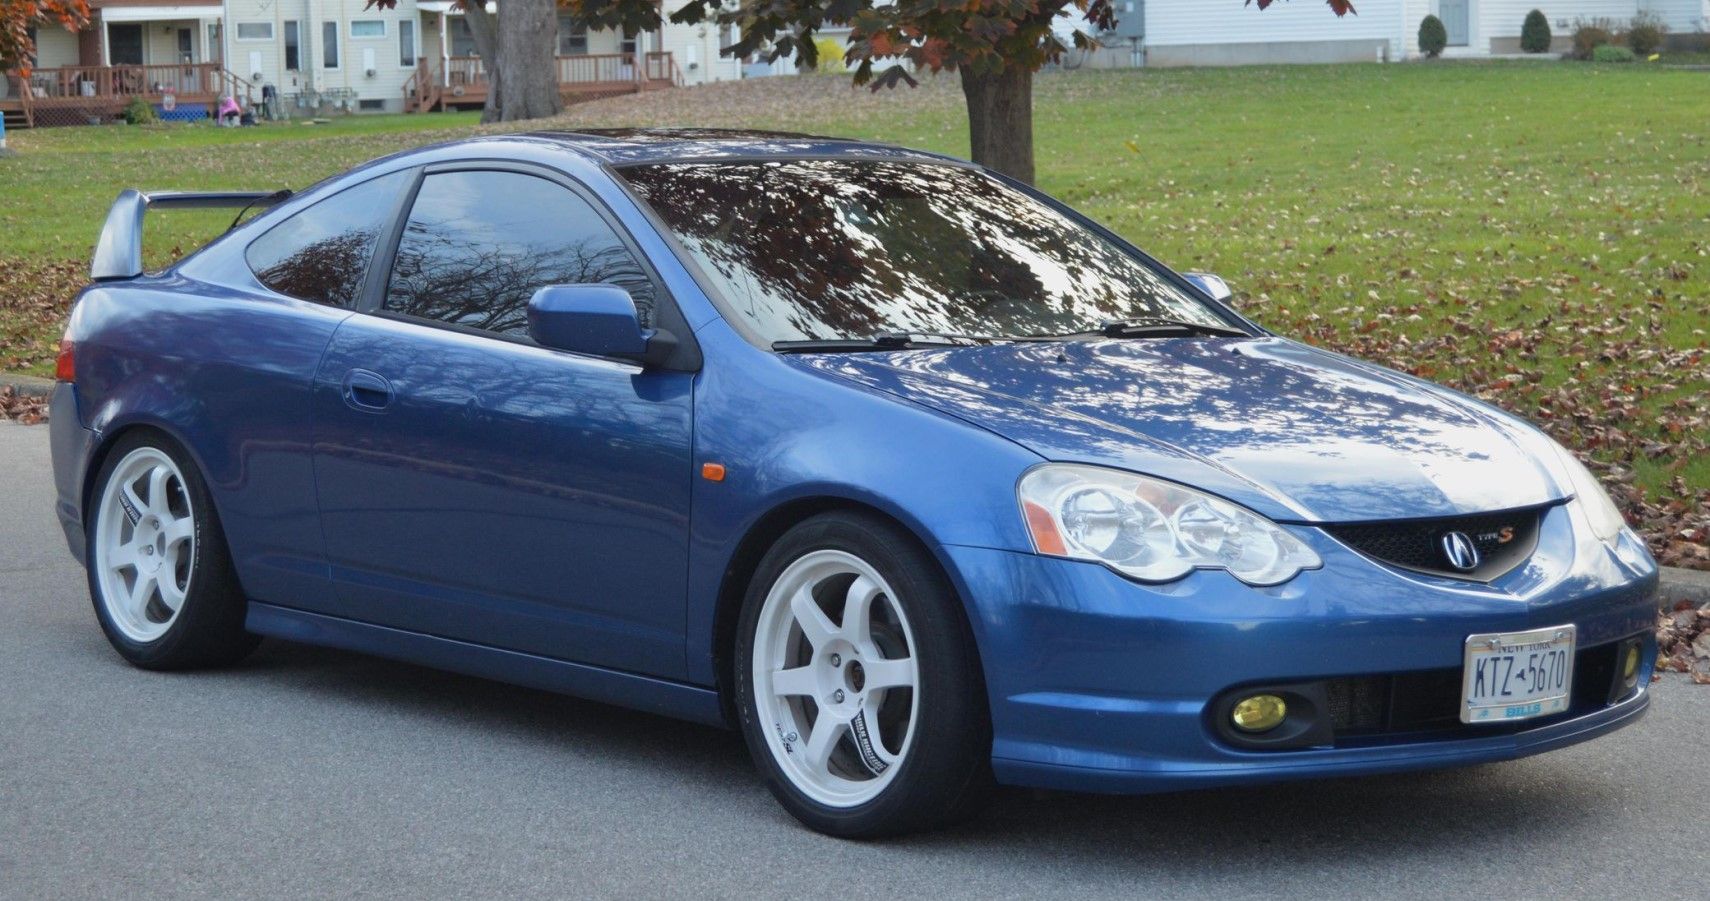 2003 Acura RSX Type-S extensively modified front third quarter view